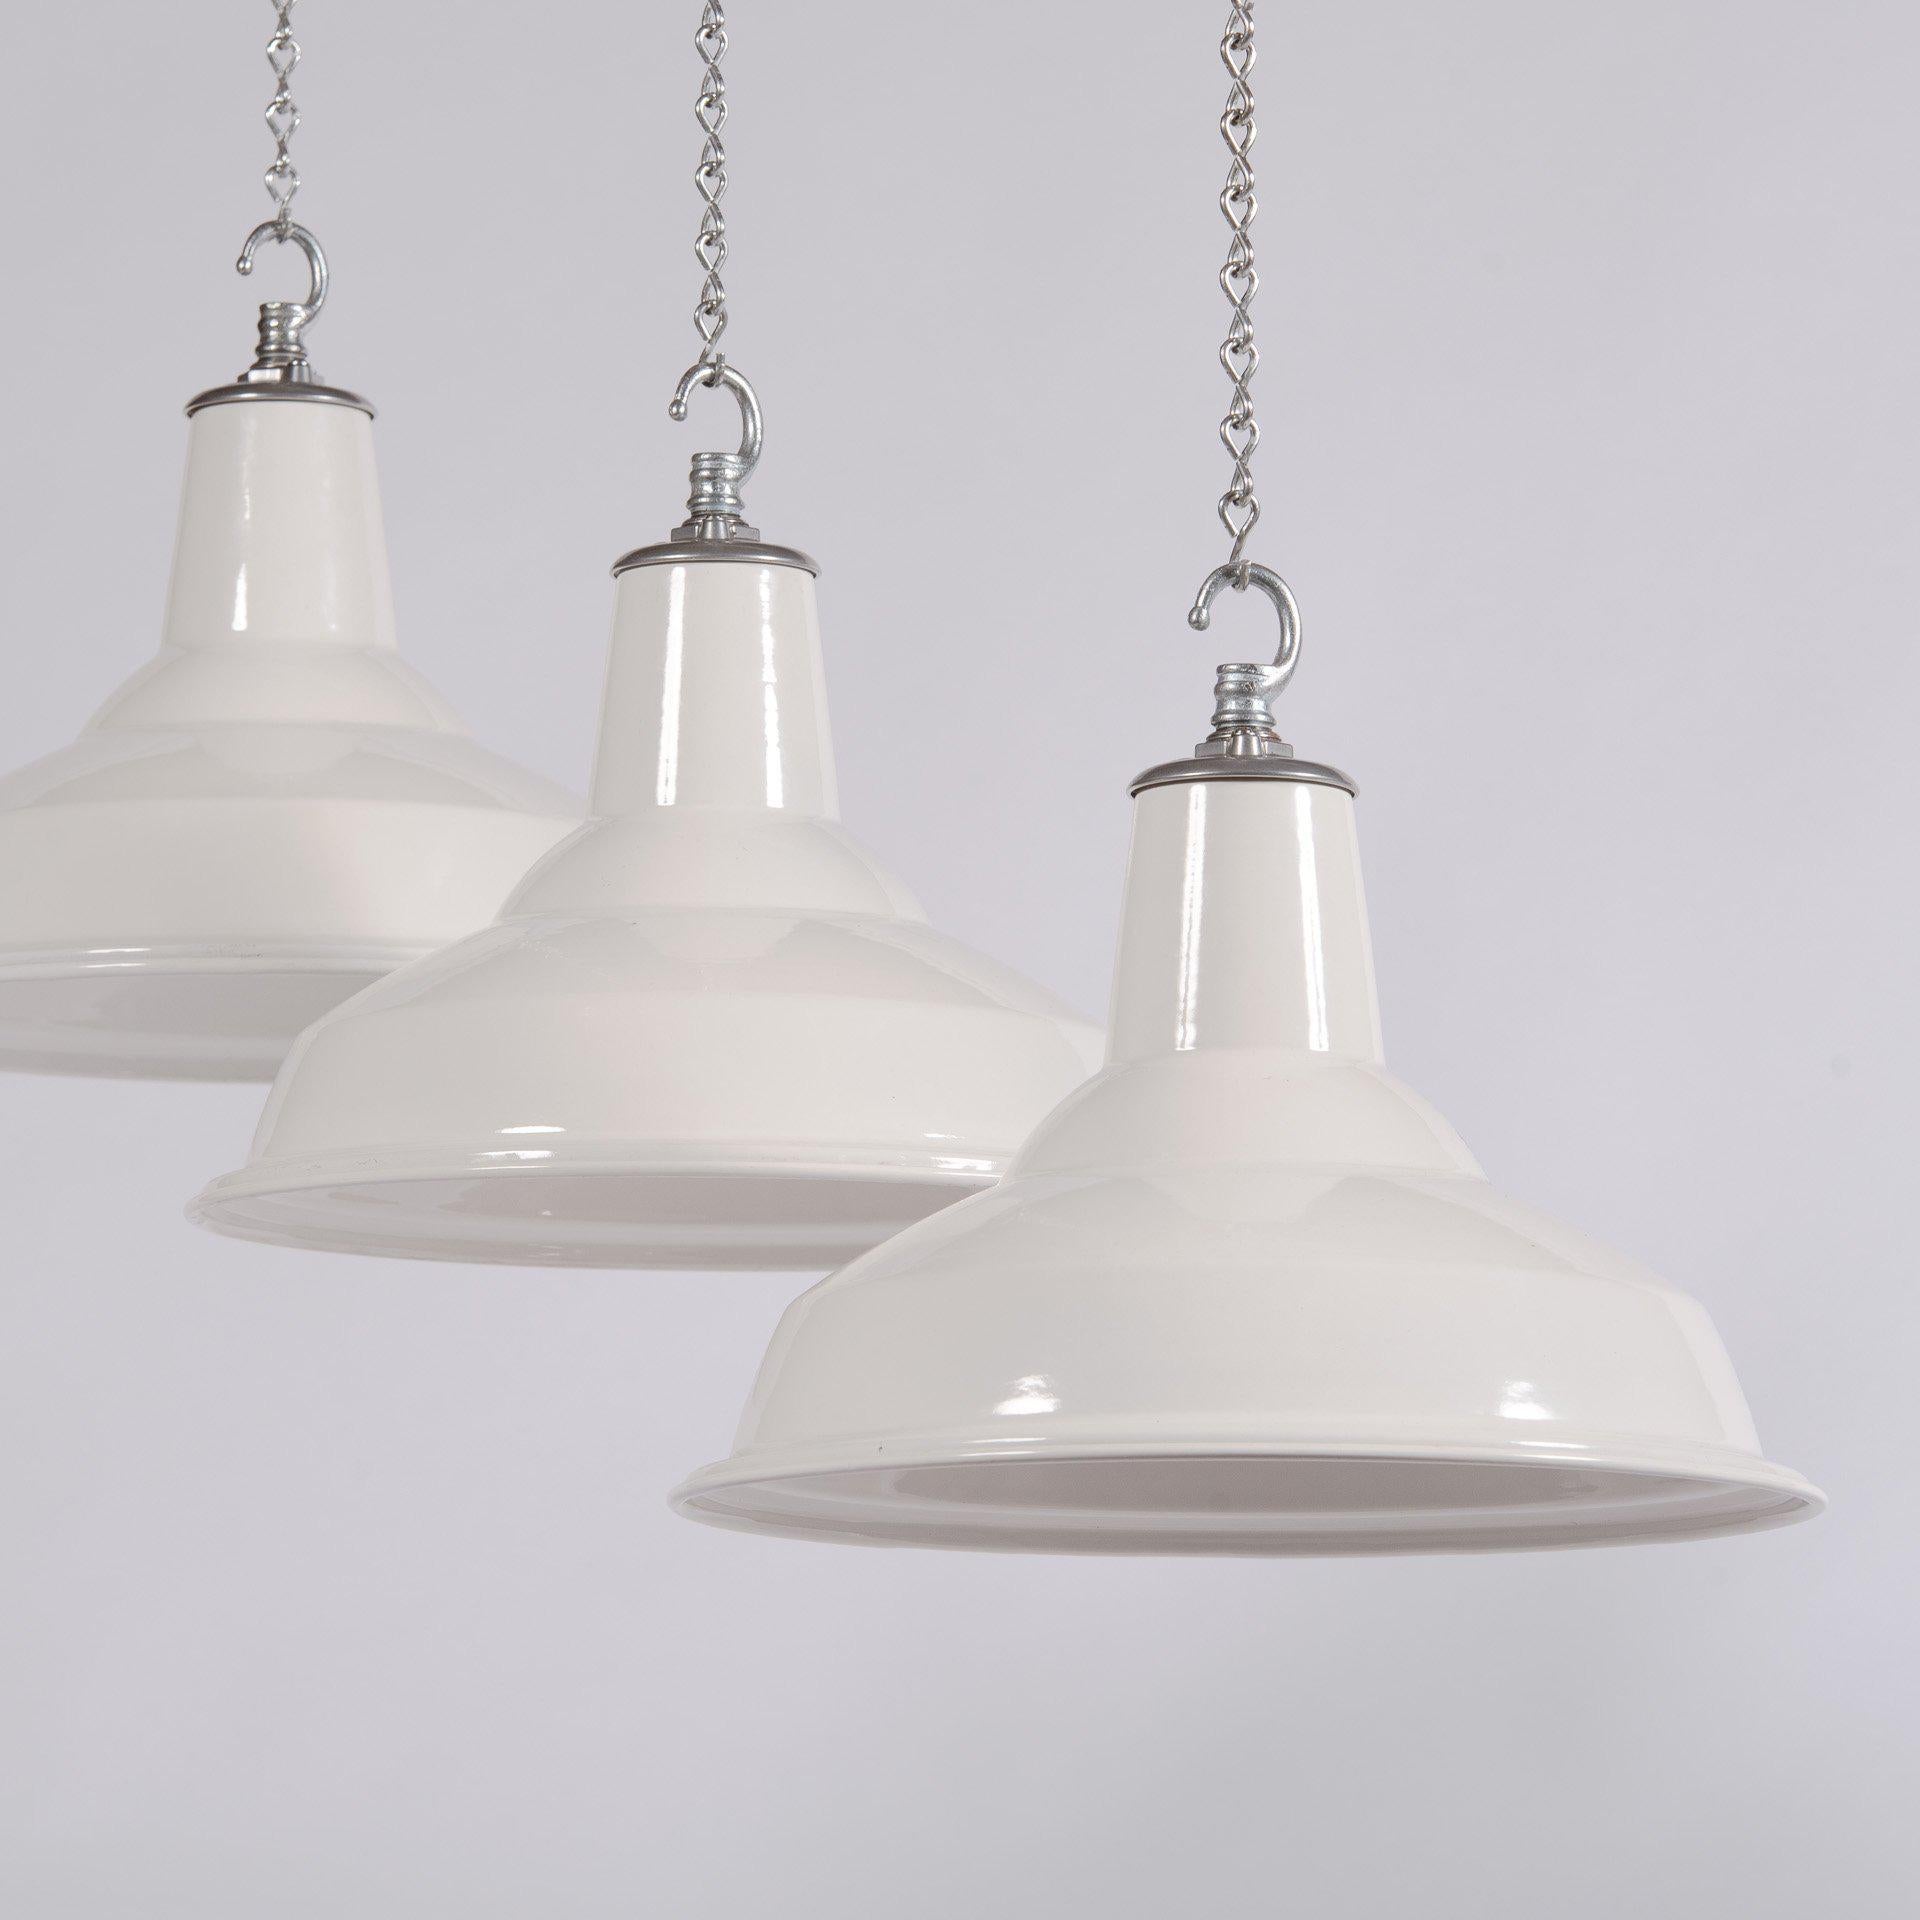 20th Century Reclaimed White Enamel Industrial Pendants by Benjamin Electric For Sale